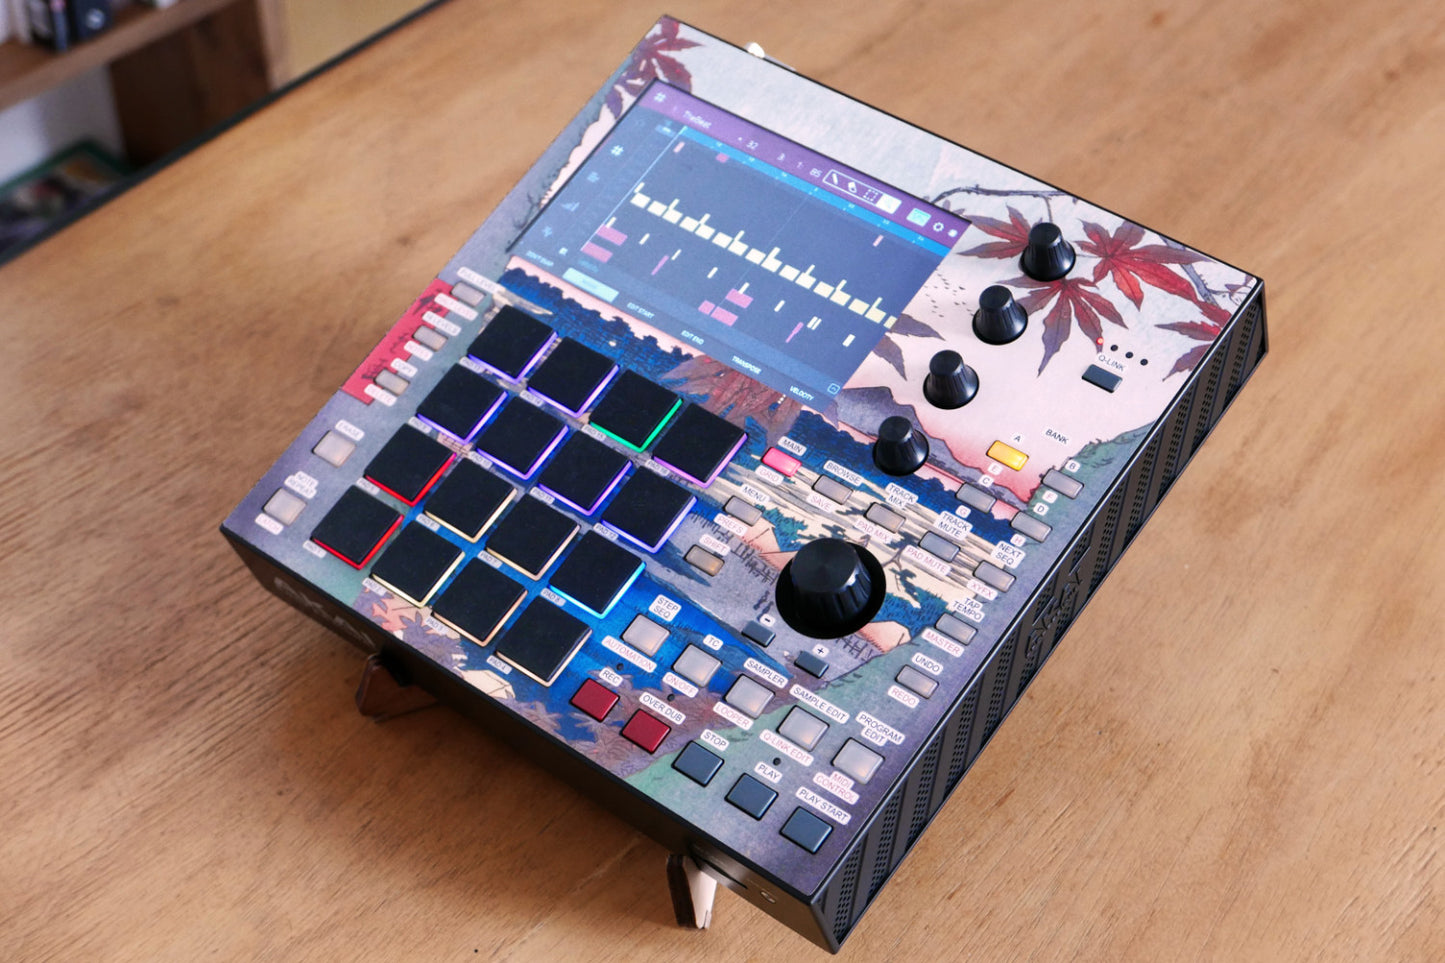 MPC One Vinyl Skins and Accessories